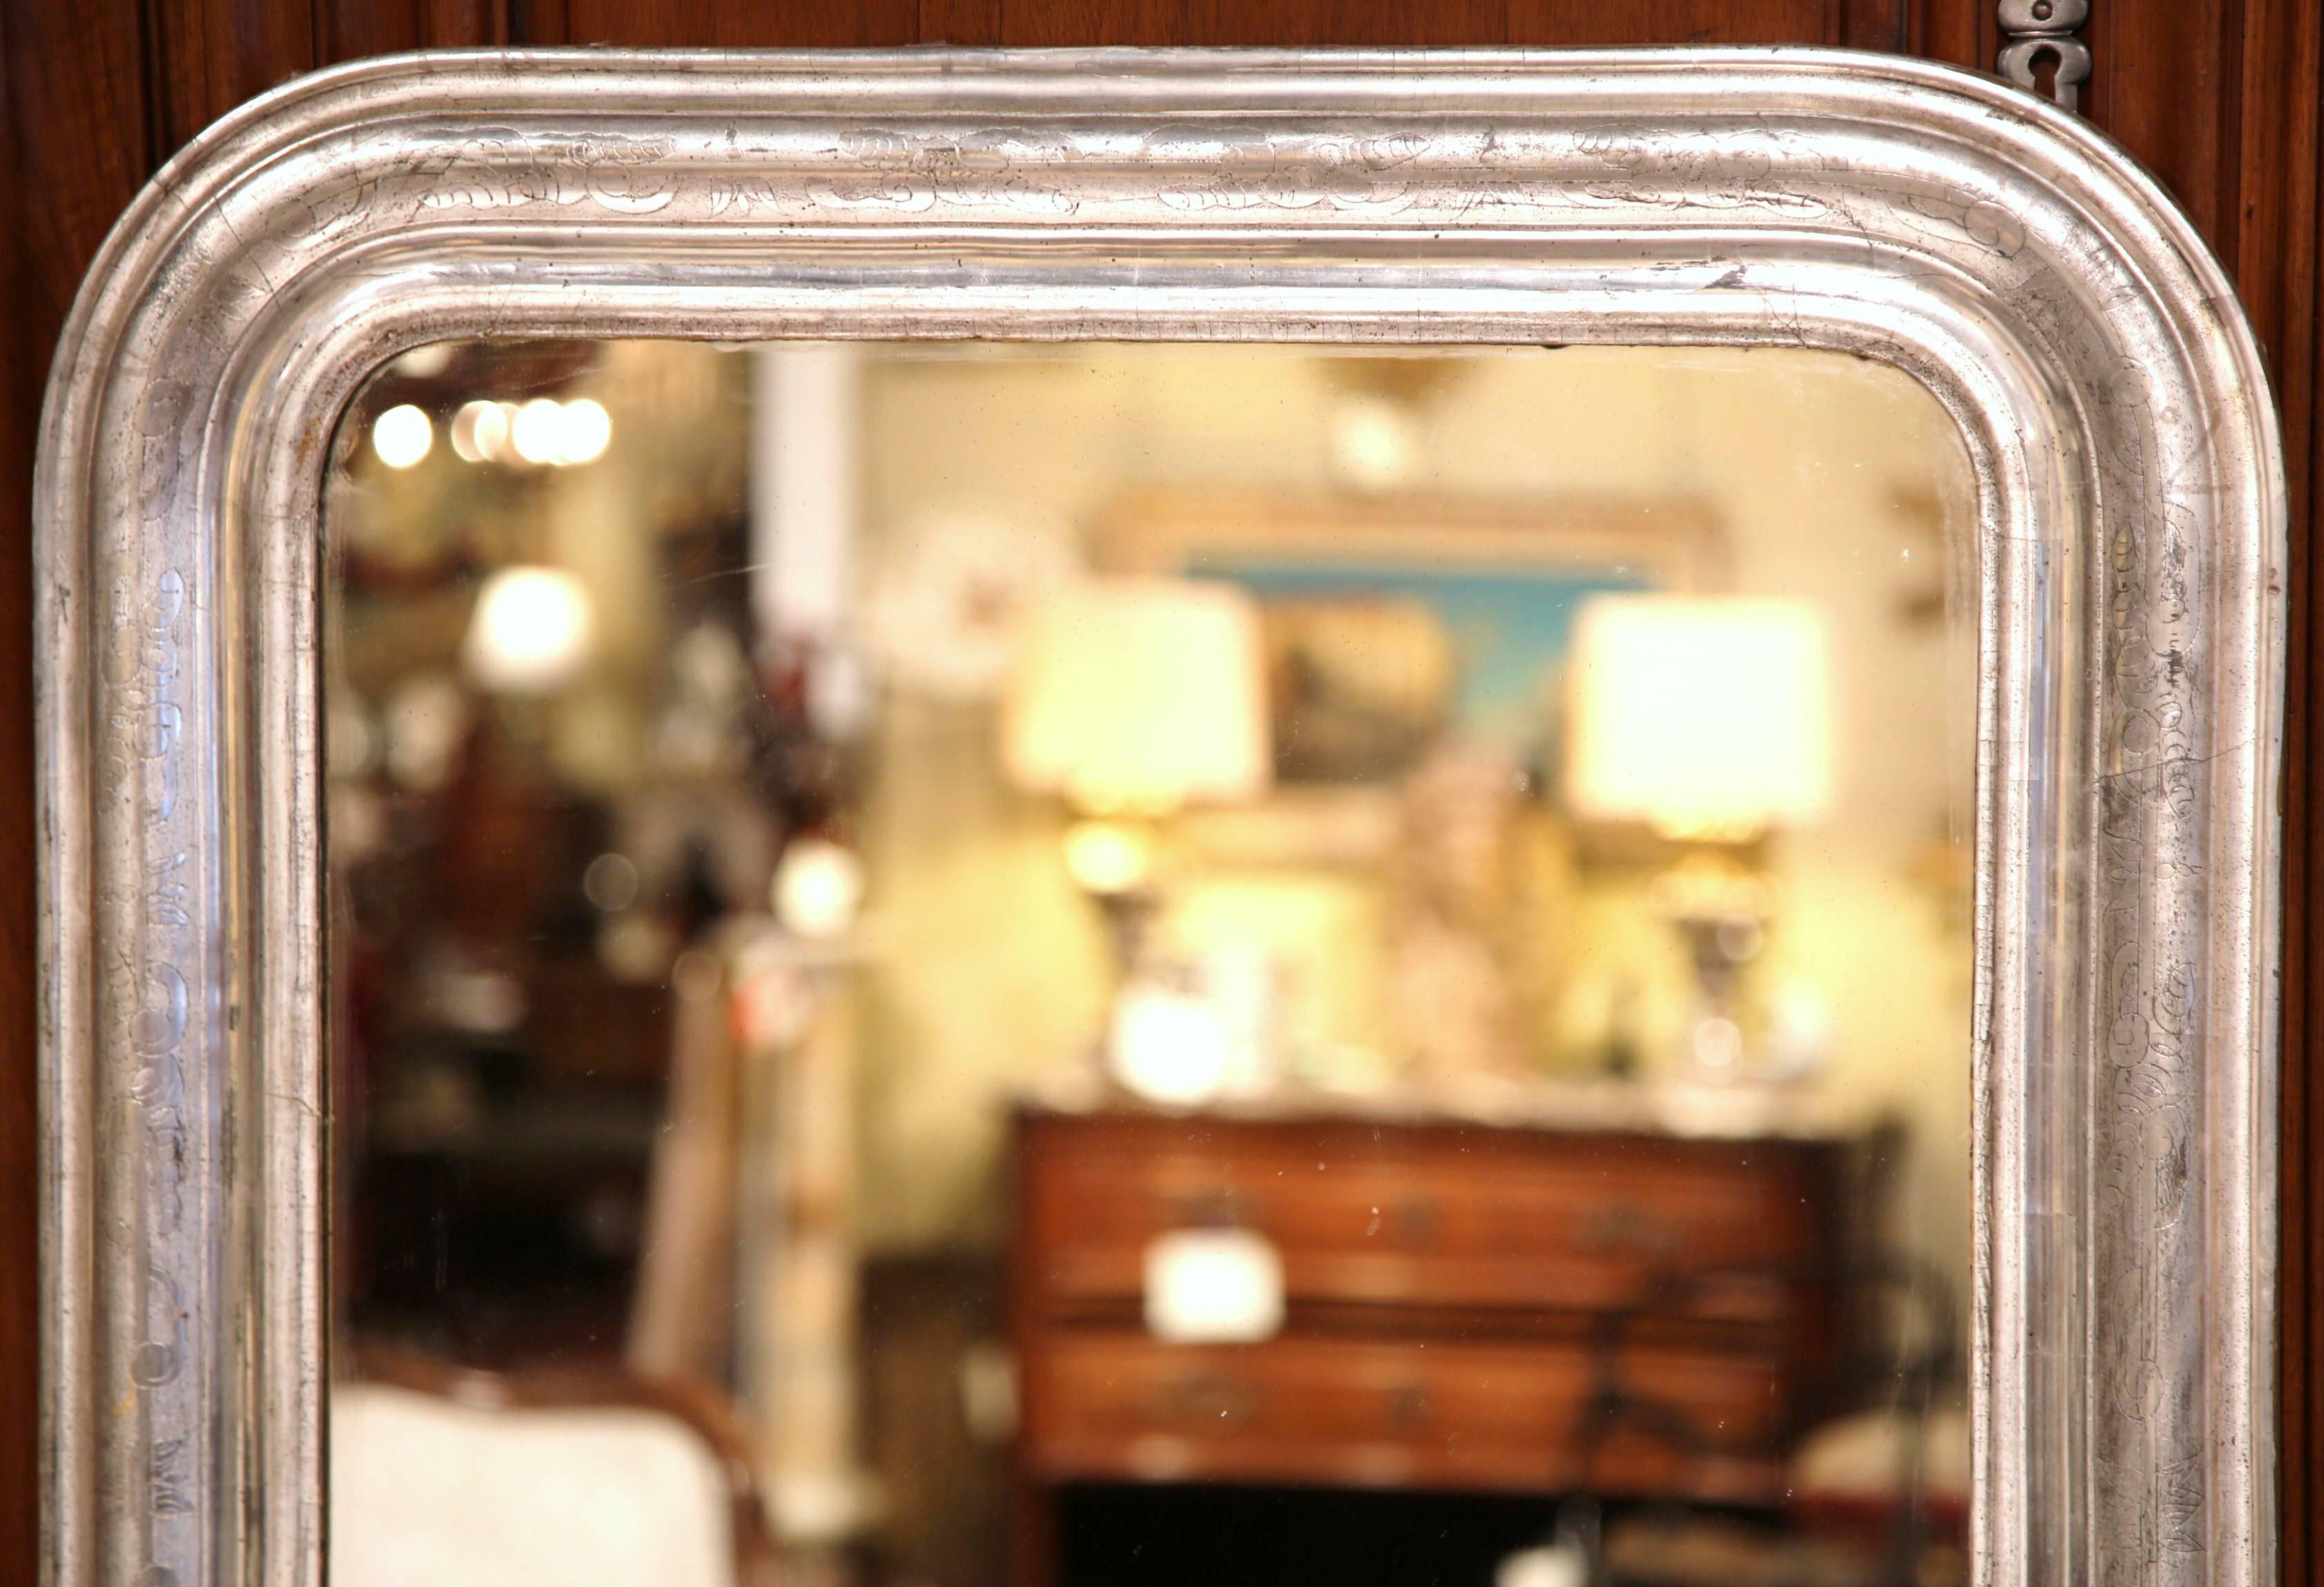 This elegant, antique Louis Philippe mirror was crafted in France, circa 1870. The mirror features discrete engraved floral designs around the frame over the original silver leaf finish. Place the Classic, metallic mirror at the end of a hallway, in